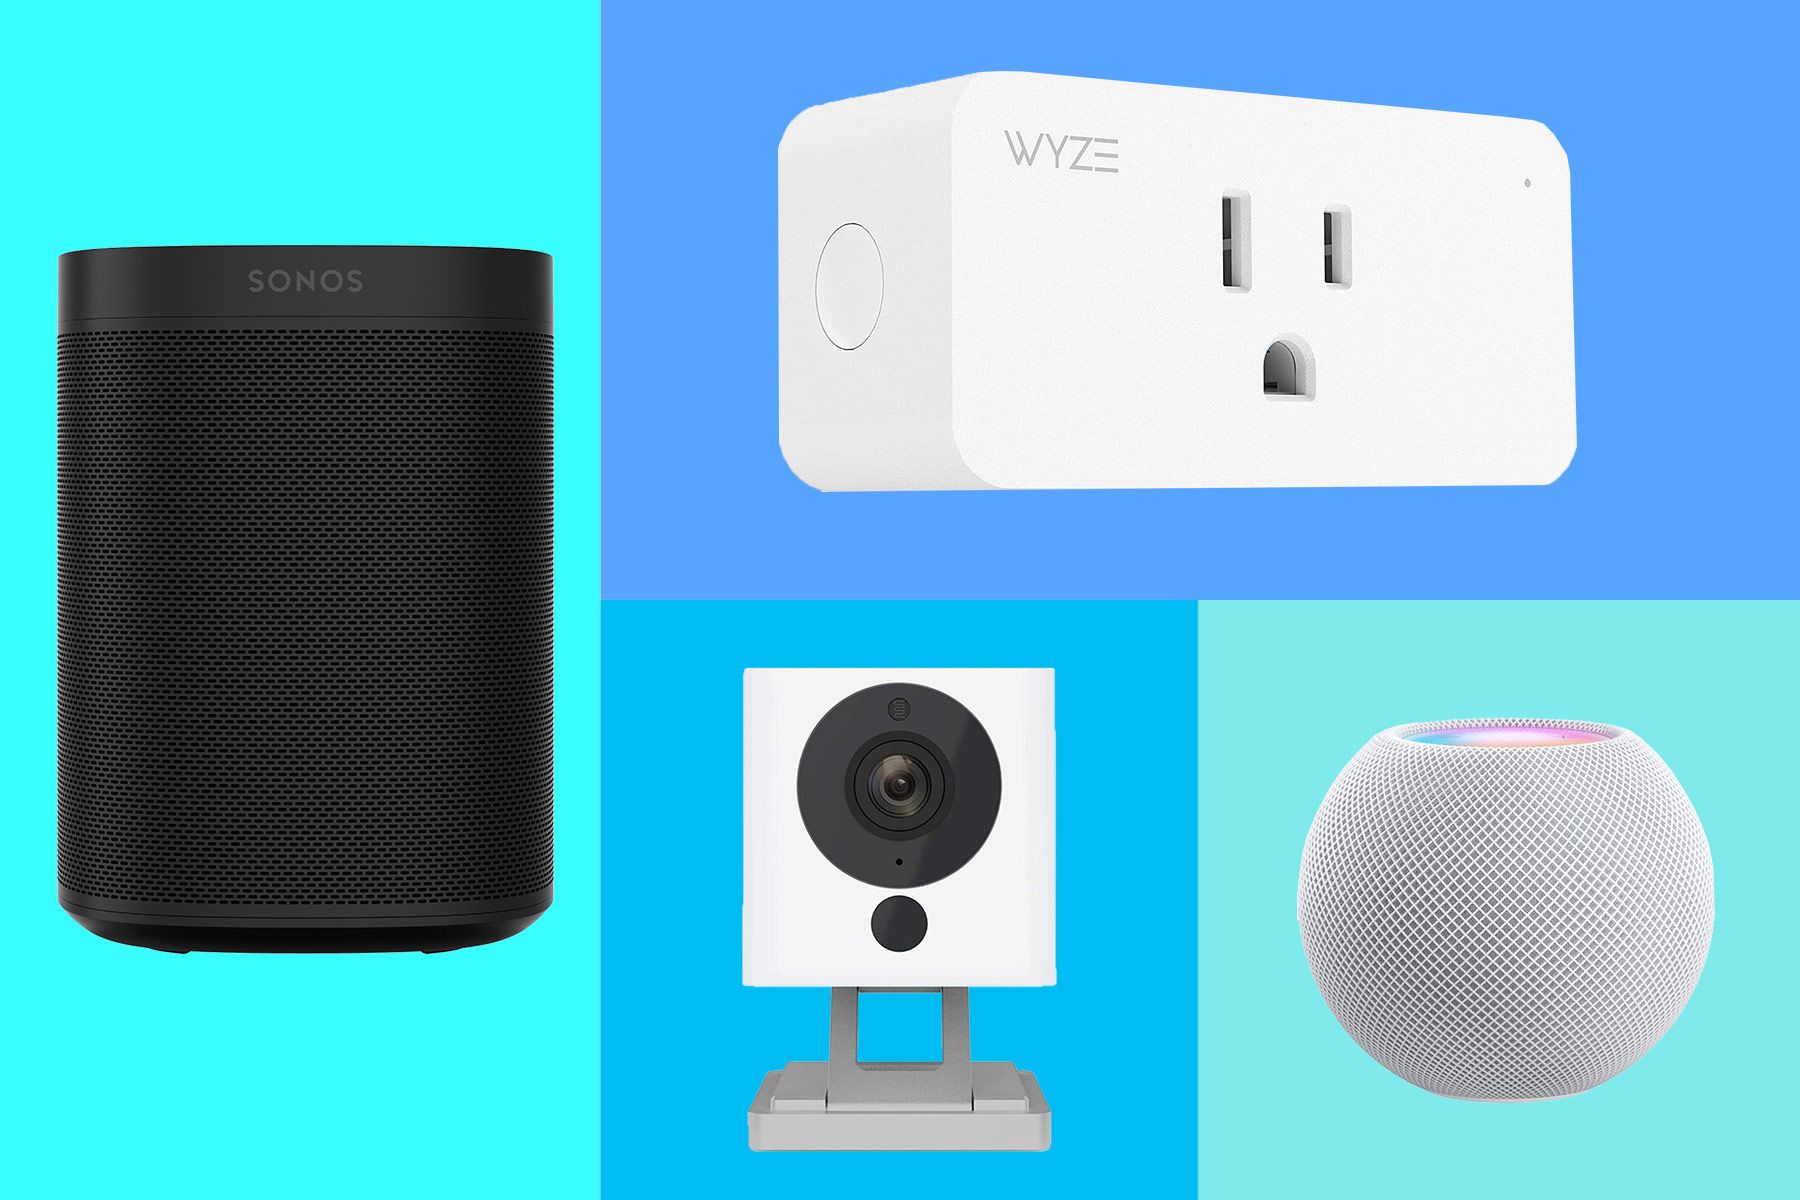 Smart Homes: 7 Gadgets And Appliances Compatible With The Google Assistant